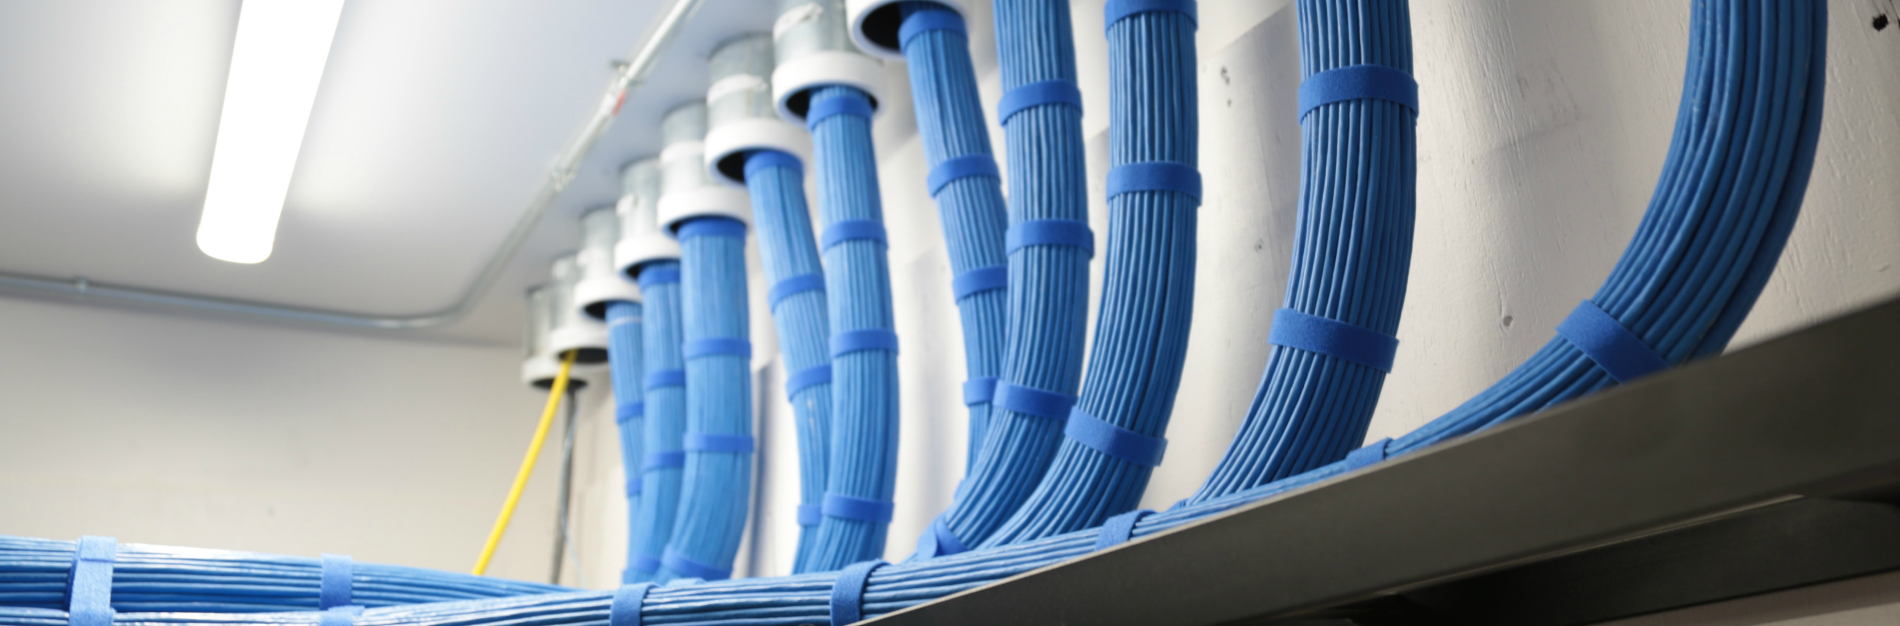 Structured cabling